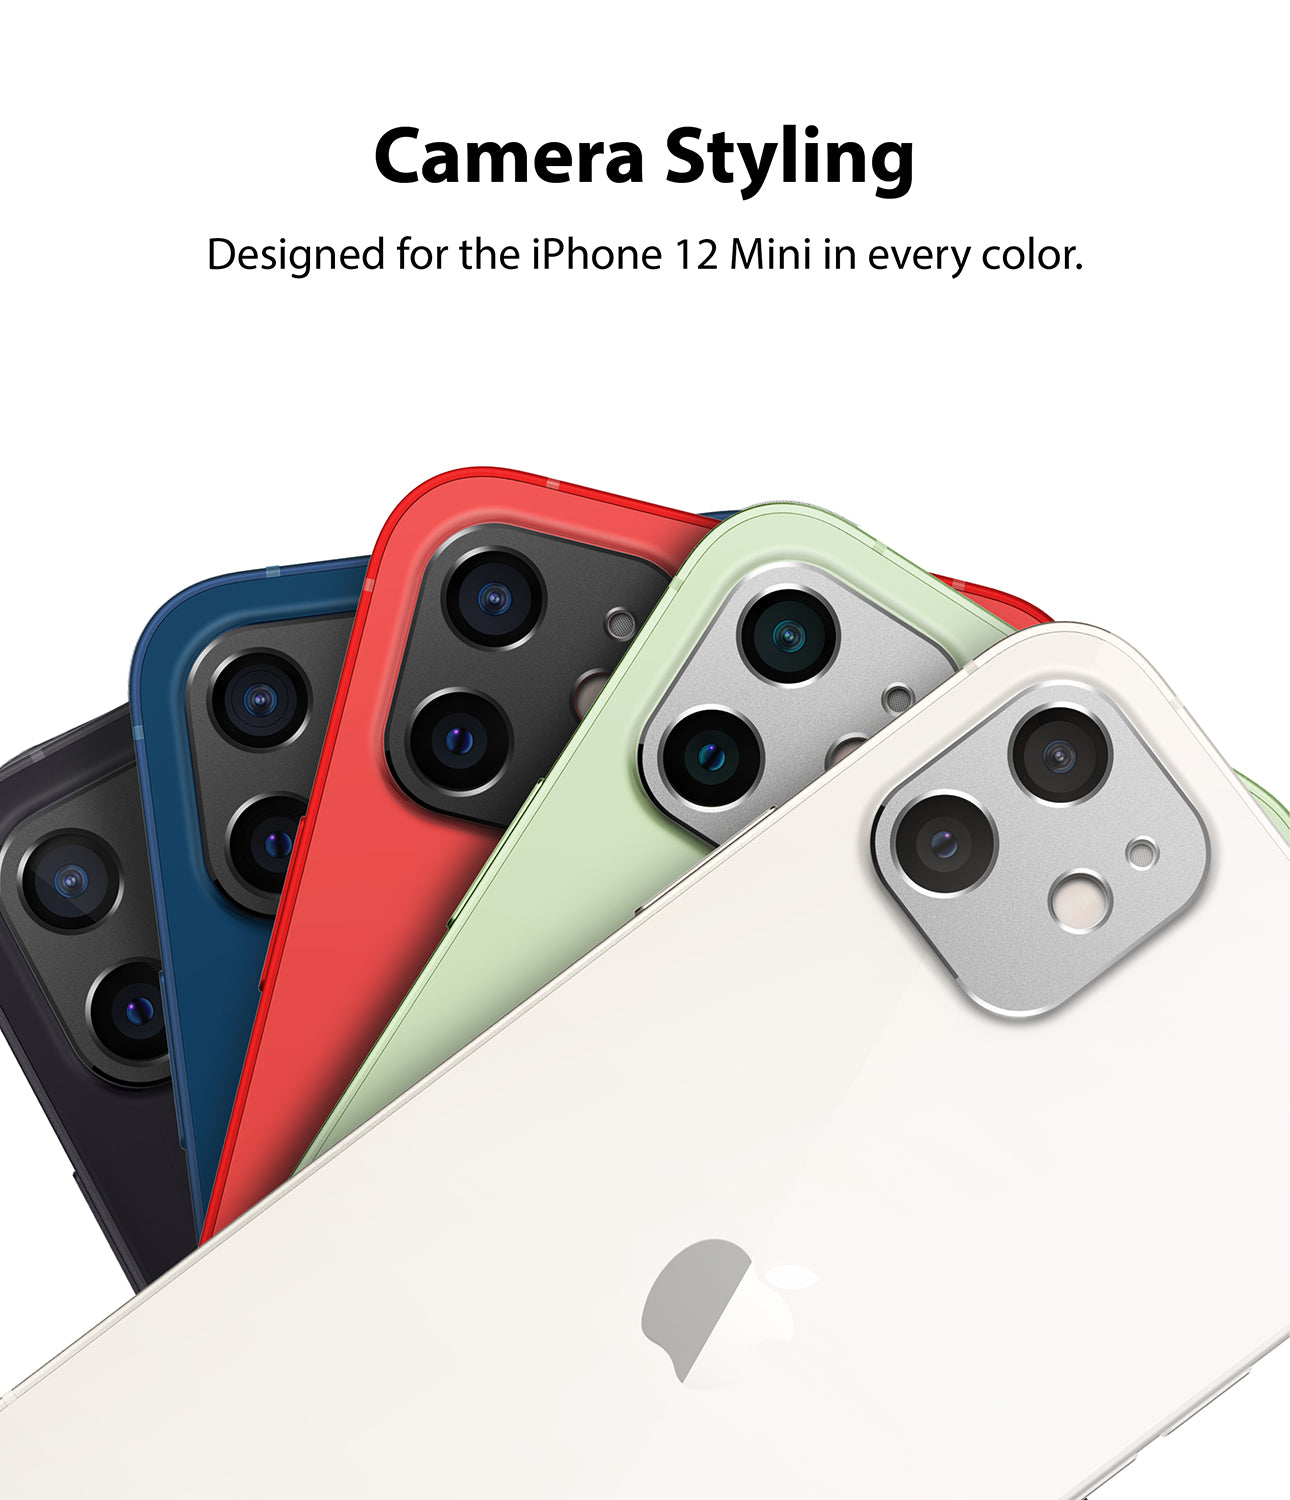 ringke camera styling for iphone 12 mini 